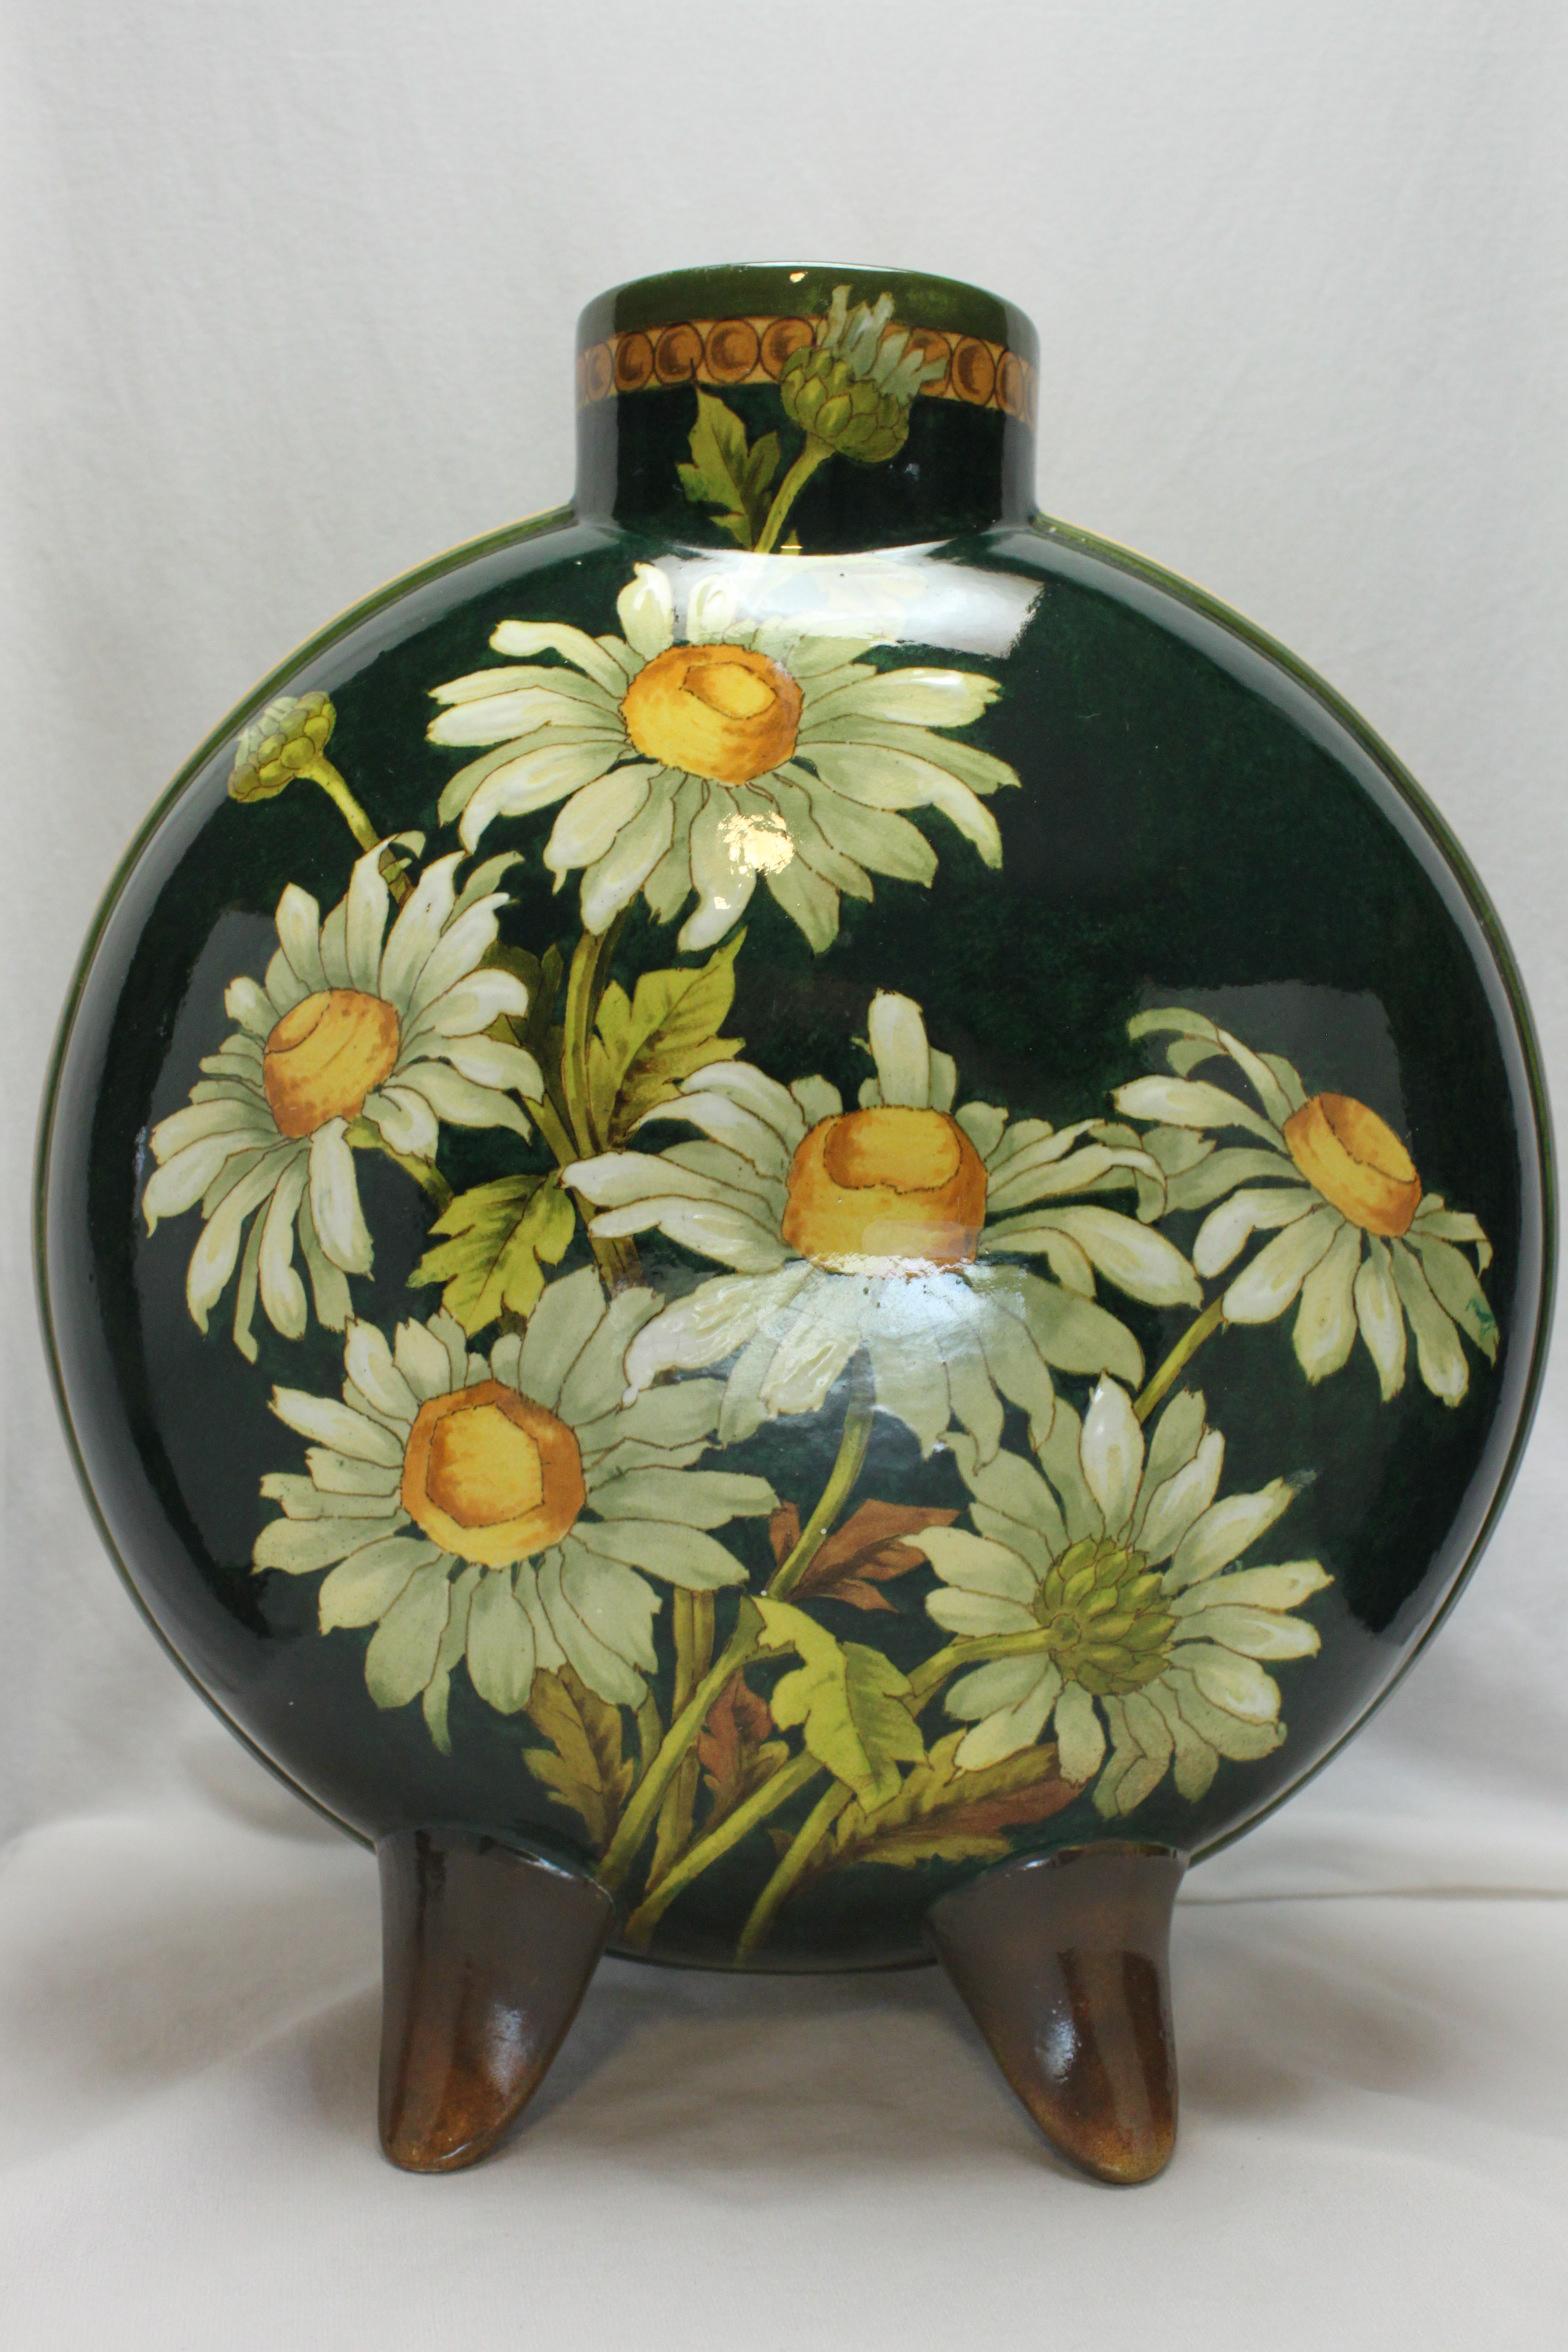 Decorated in the taste of the Aesthetic Movement, this Doulton Lambeth hand painted flask vase features an exuberance of flowers. On one side, a large spray of daisies sits on a dark green ground, whilst on the other, sunflowers peek out from a